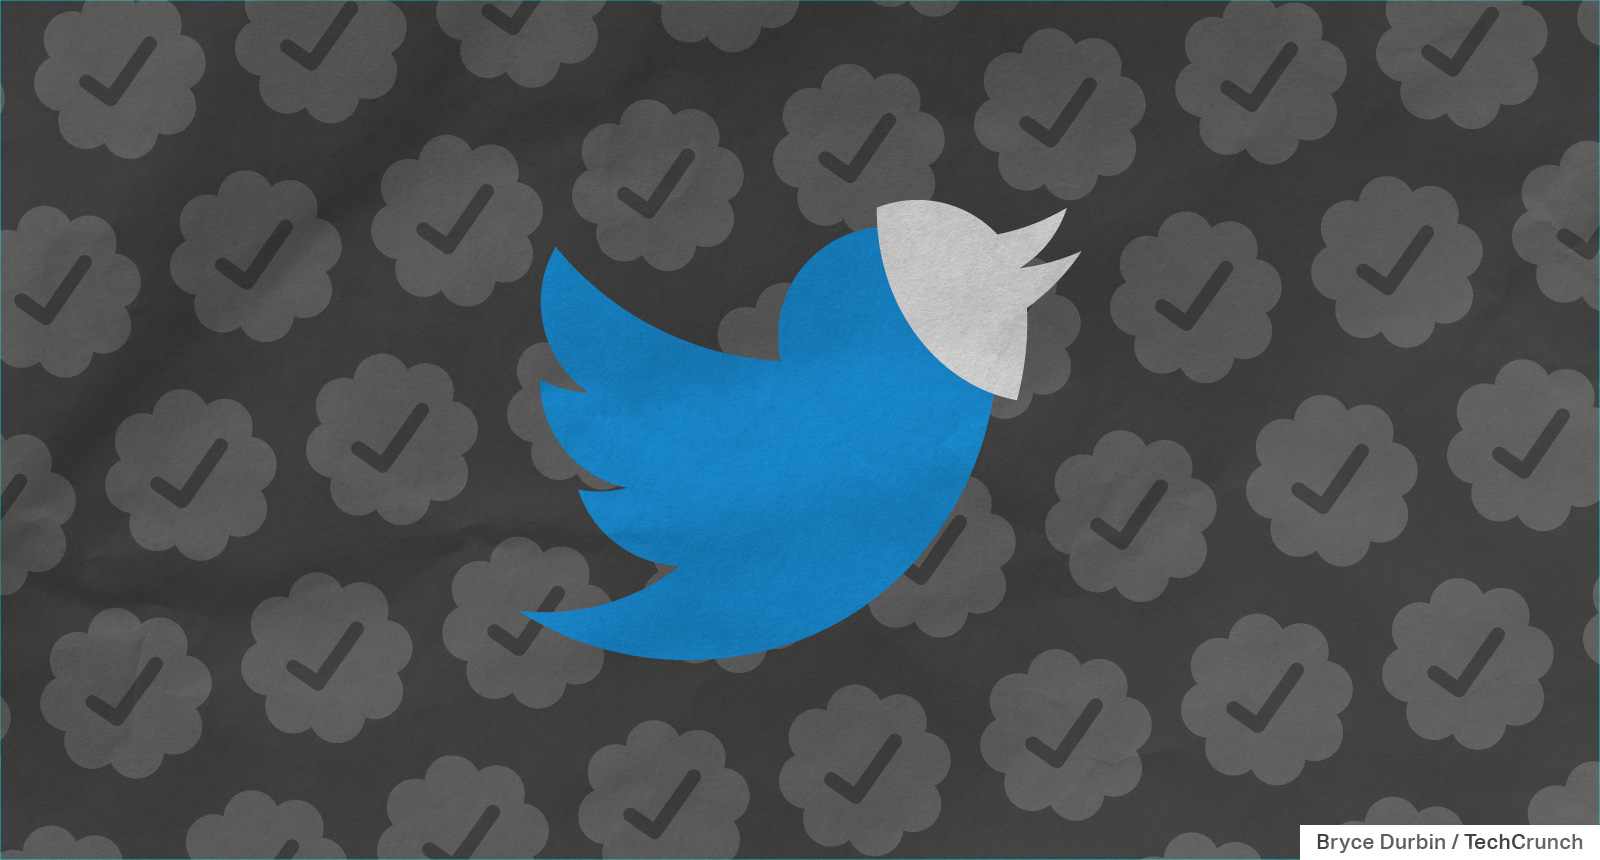 Daily Crunch: Starting today, Twitter says all advertisers must obtain verified accounts